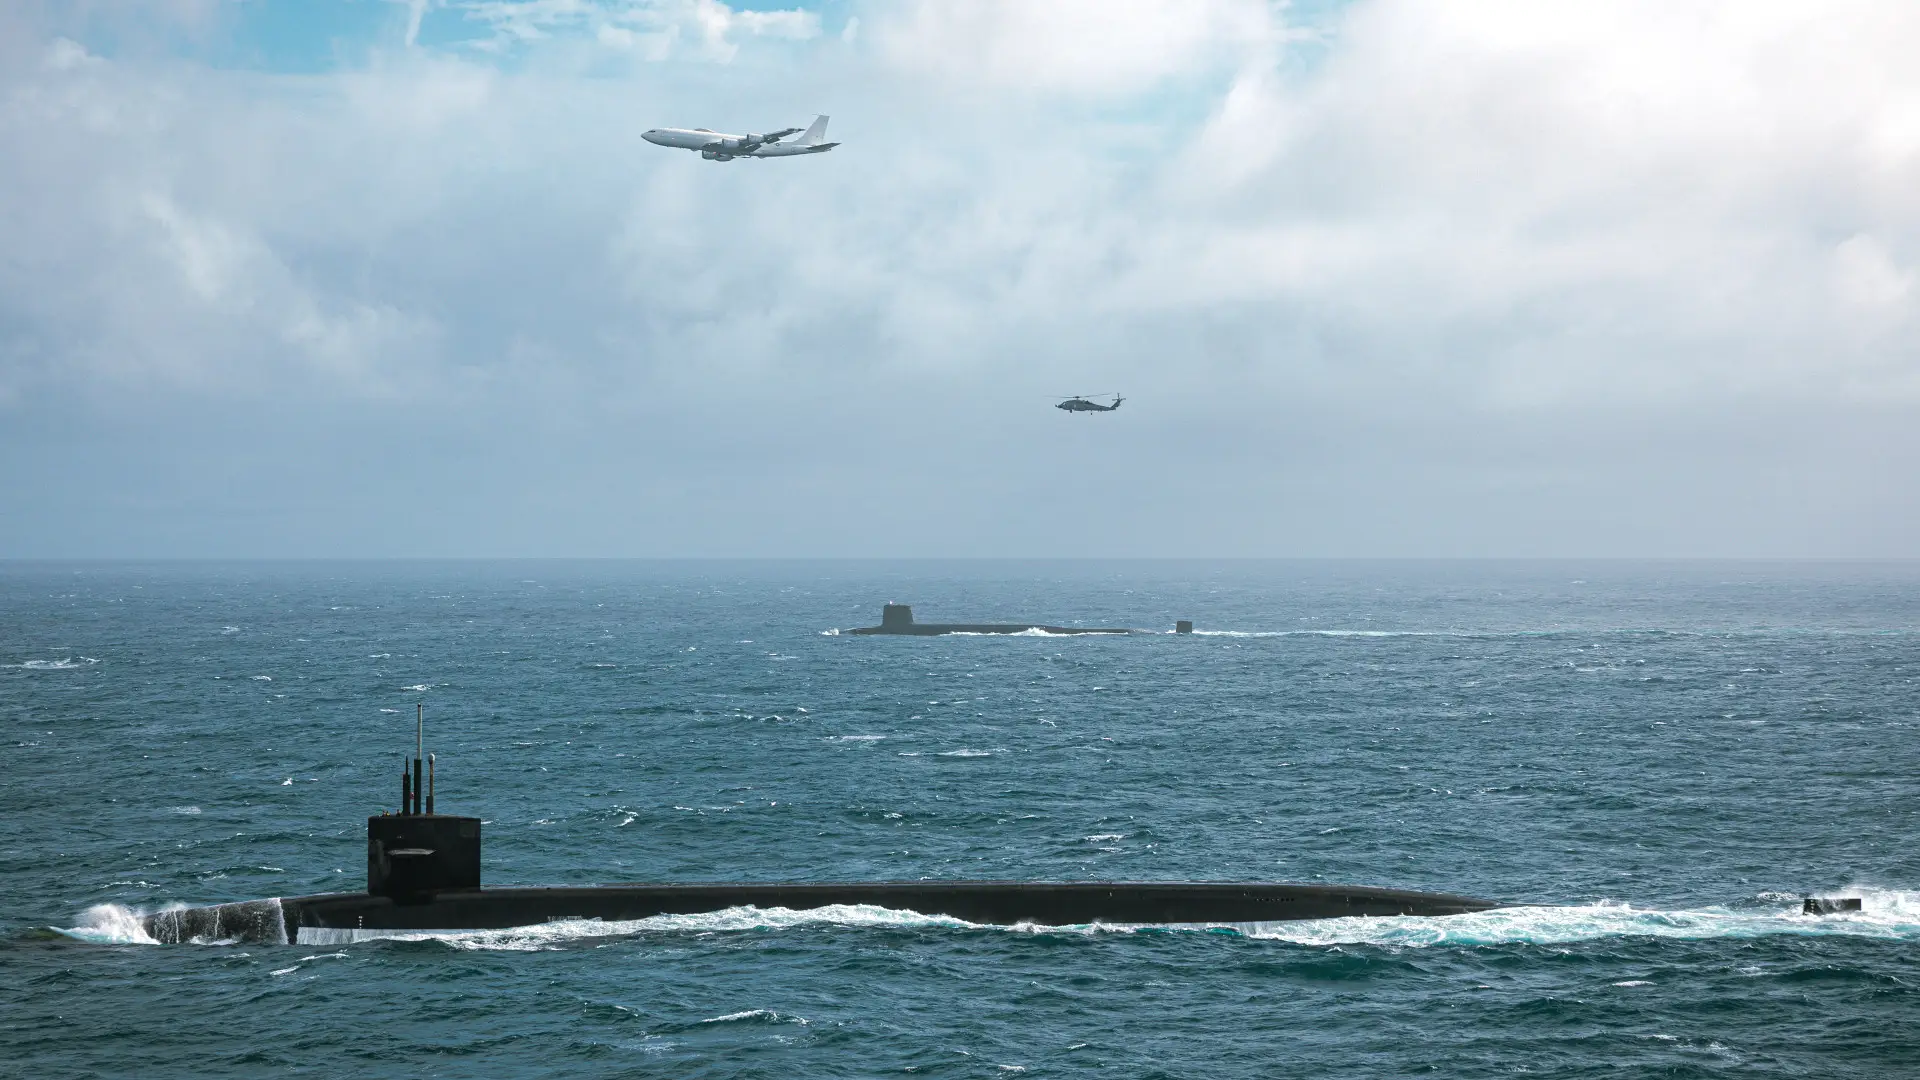 The U.S. and U.K. conducted exercises with the submarines USS Tennessee and Vanguard, which carry Trident II missiles with nuclear warheads - a Boeing E-6B Mercury doomsday aircraft flew over them